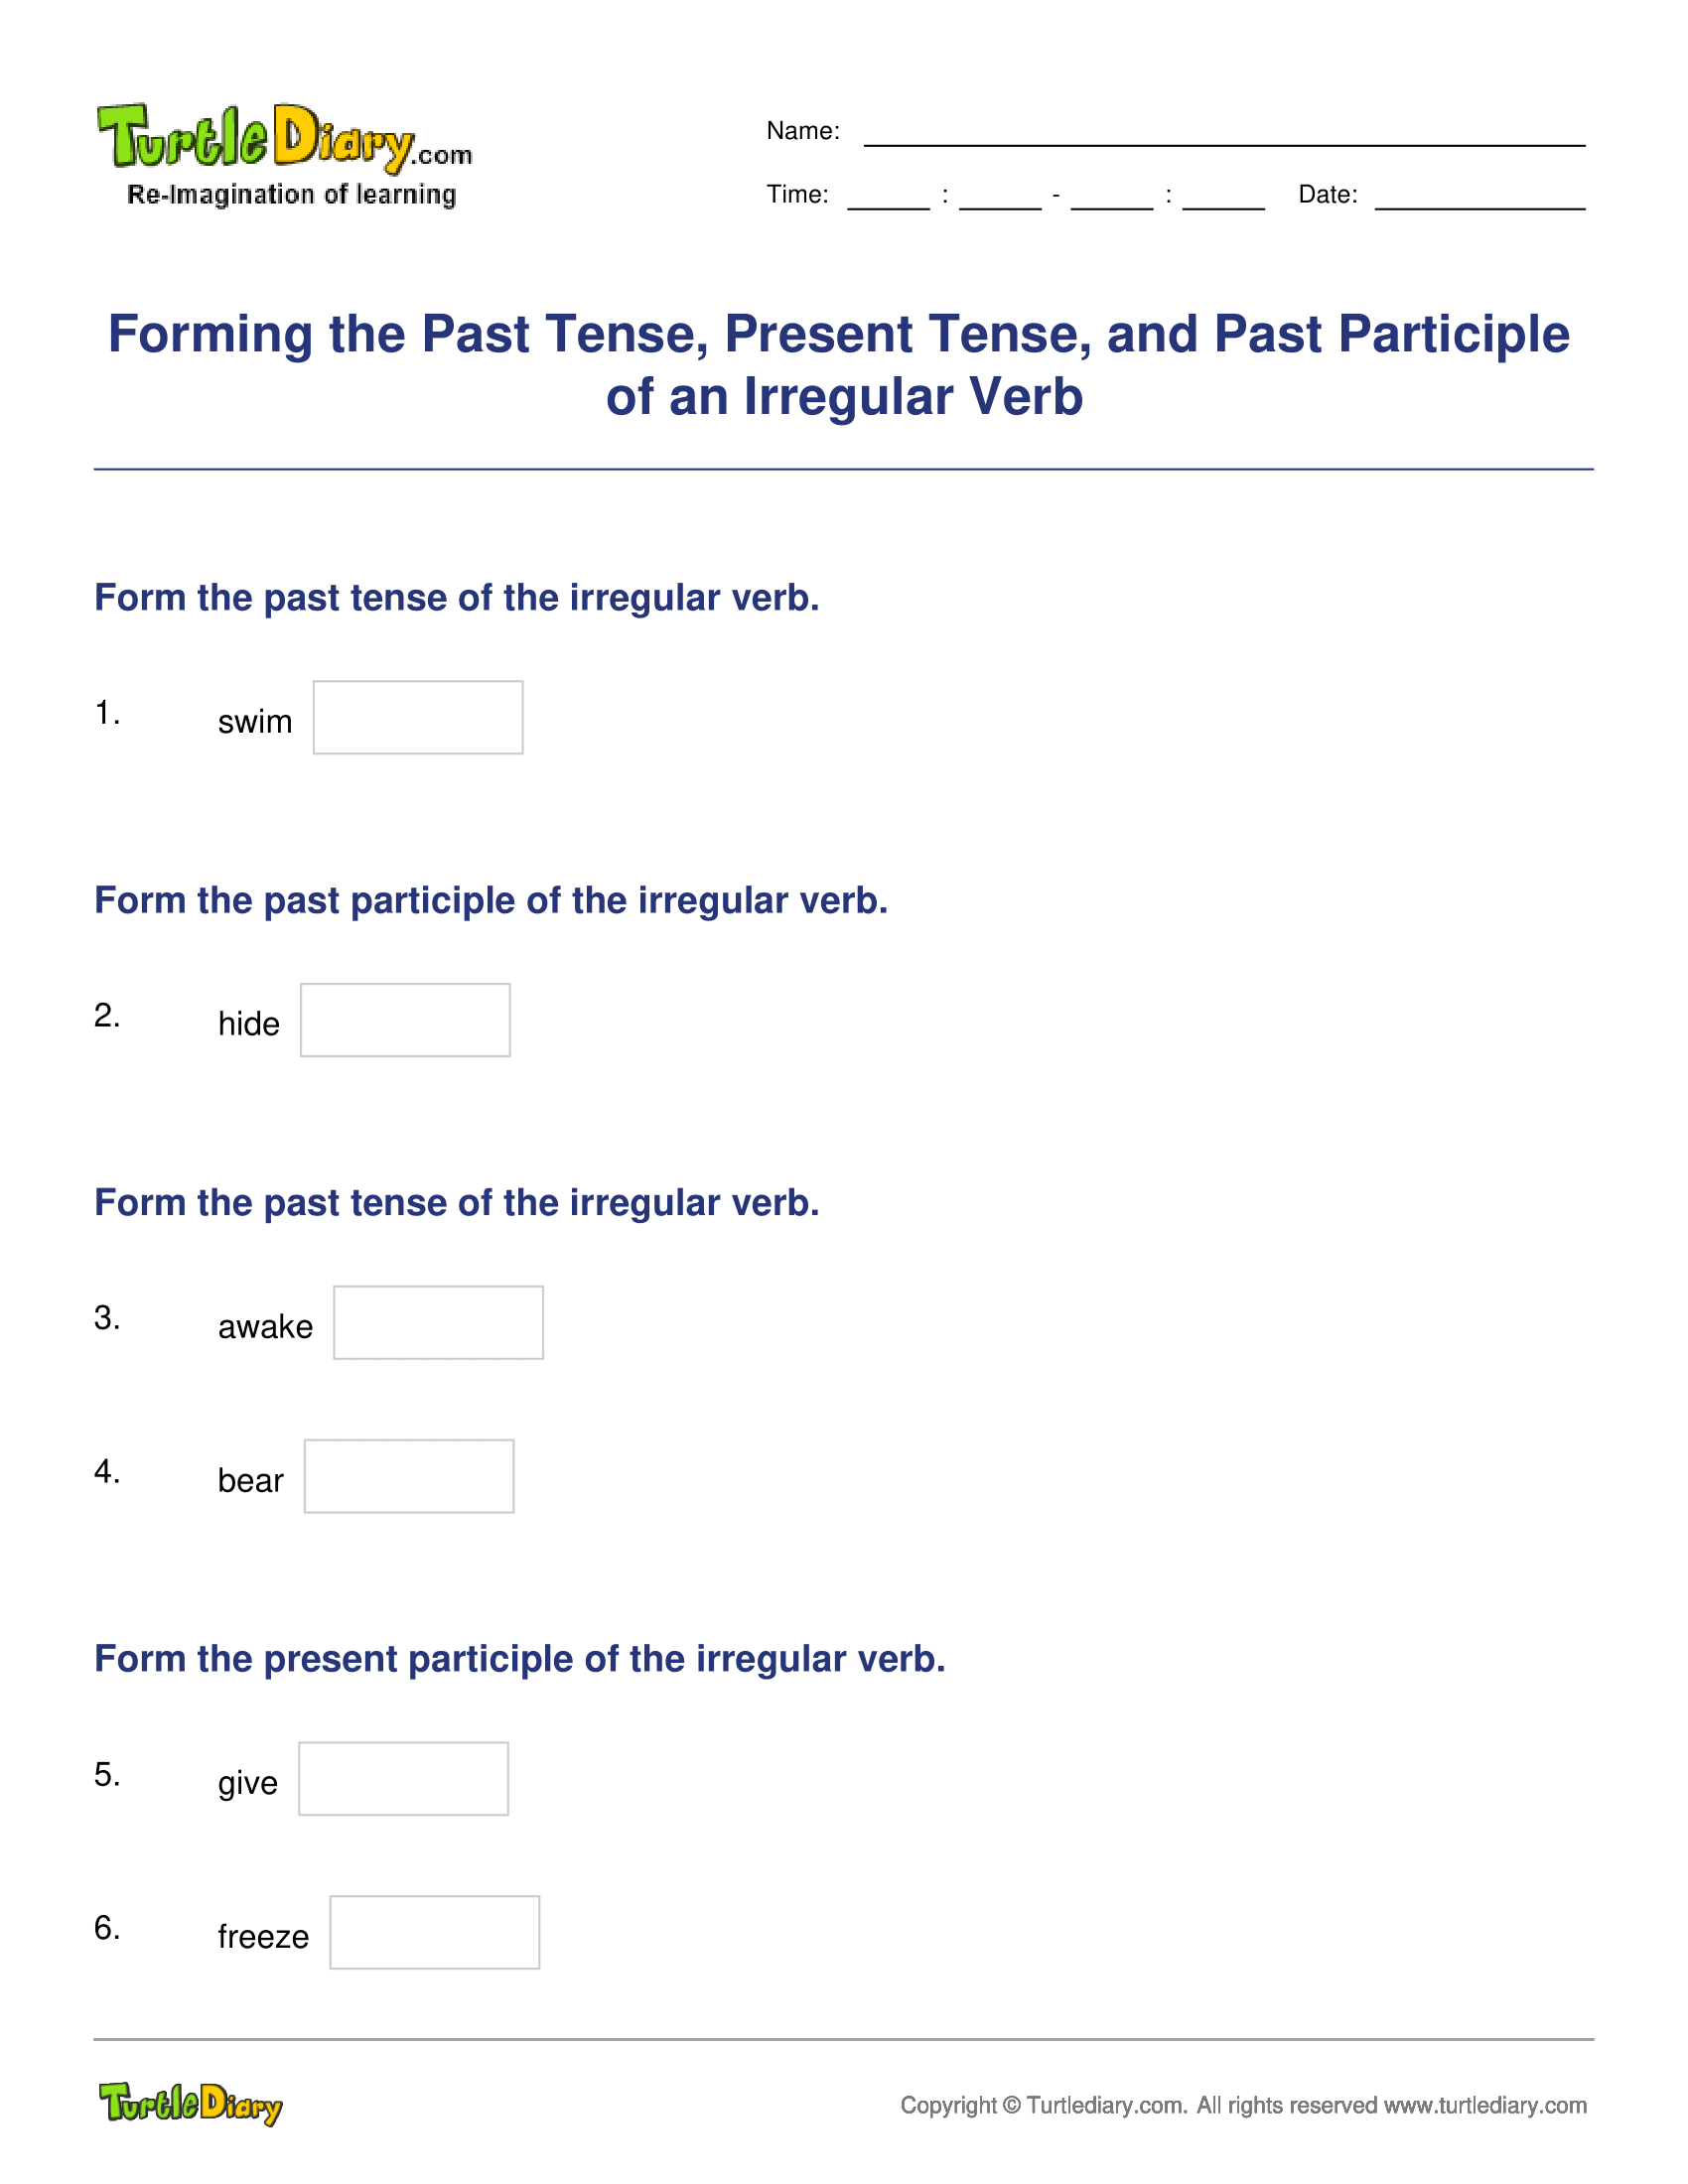 Forming the Past Tense, Present Tense, and Past Participle of an Irregular Verb